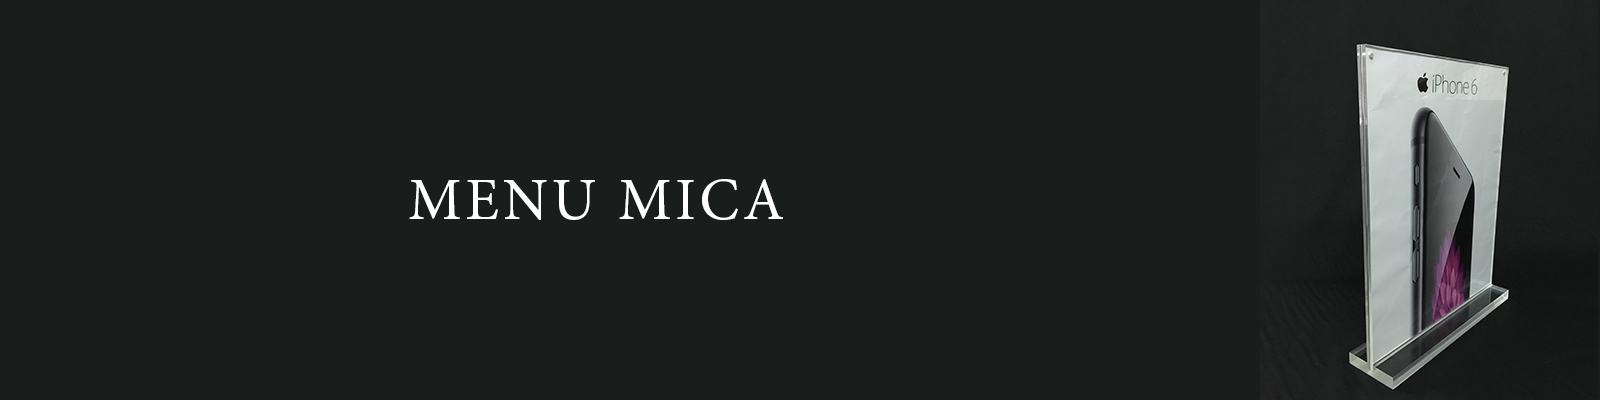 banner-mica-30-11-2017-14-09-59.png